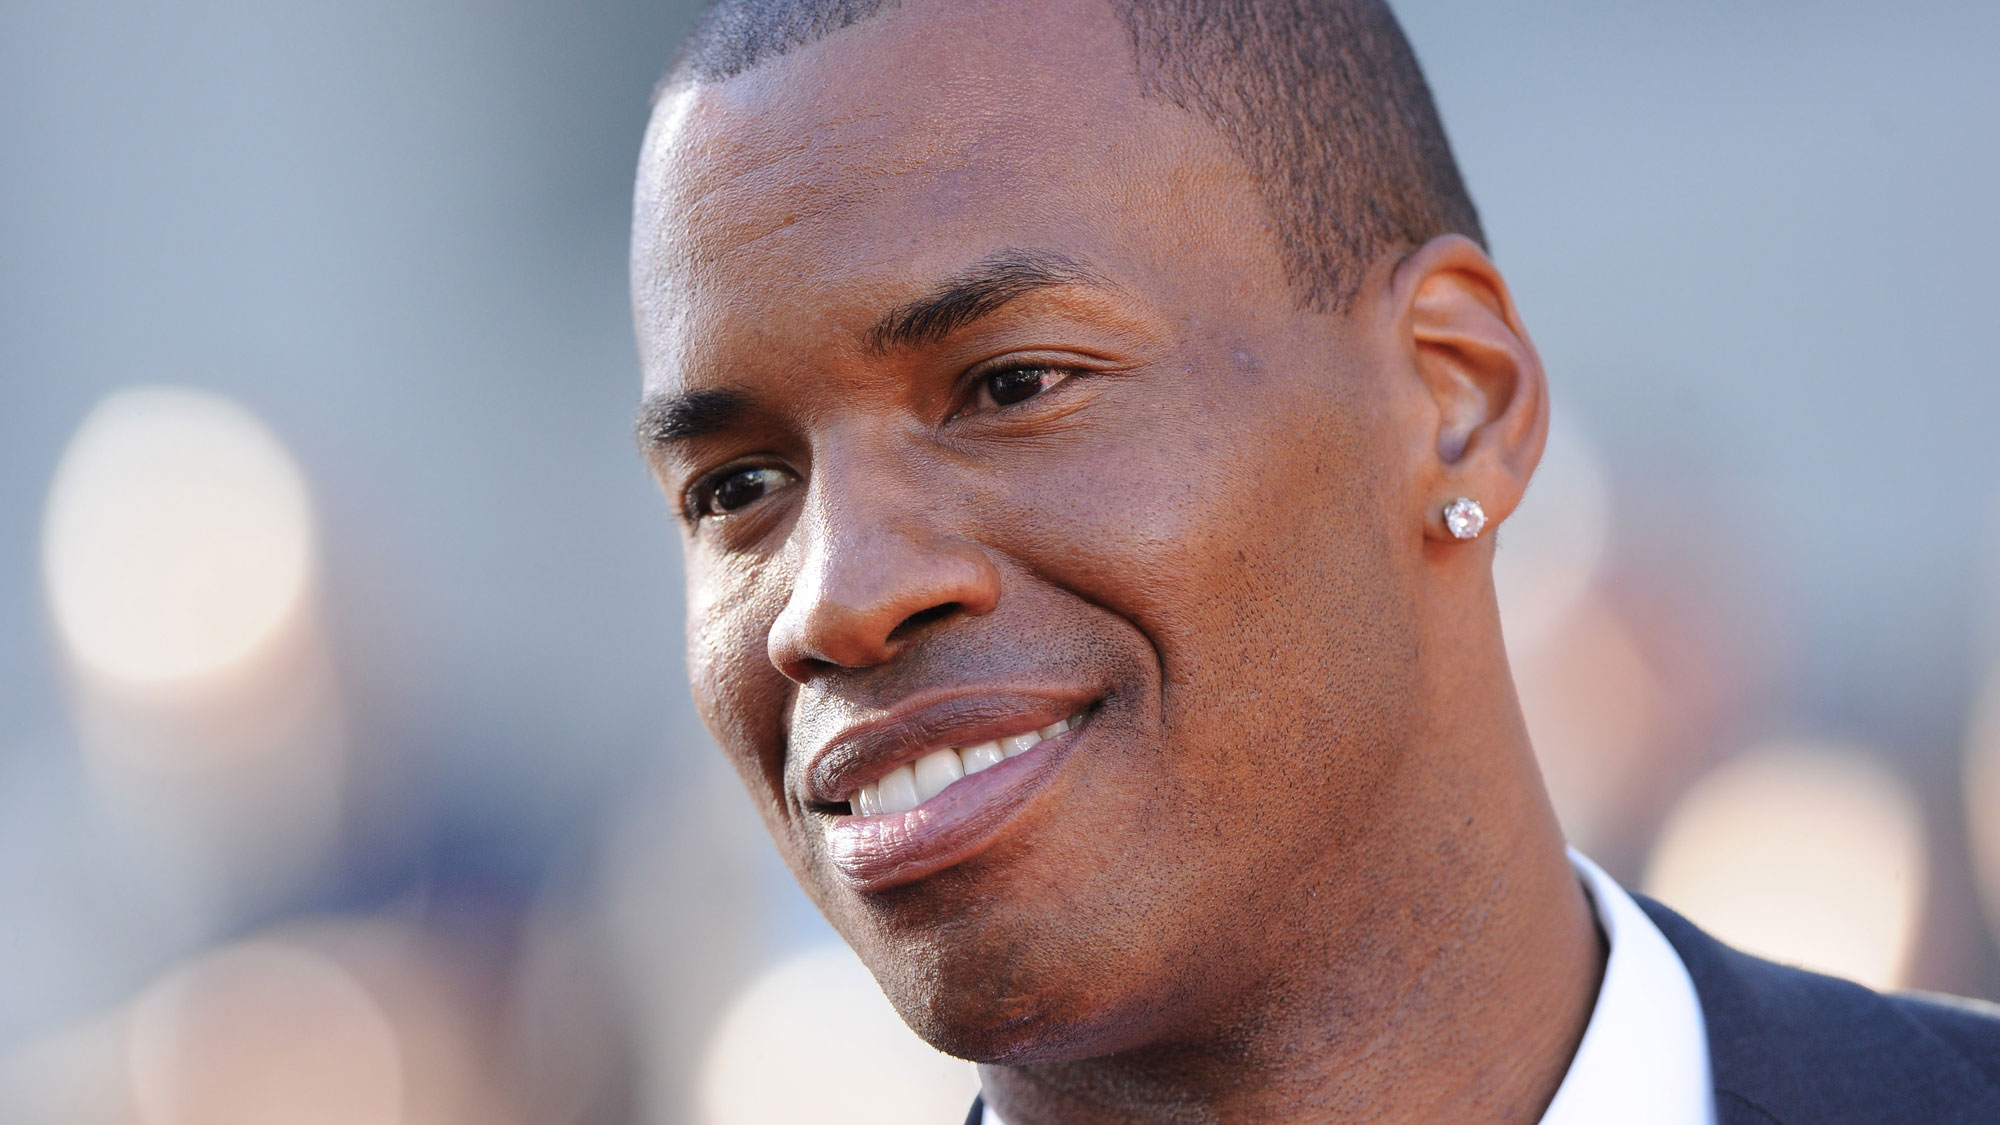 Growing Up Tall: The Diet of a 7-Foot Tall Man, According to Jason Collins